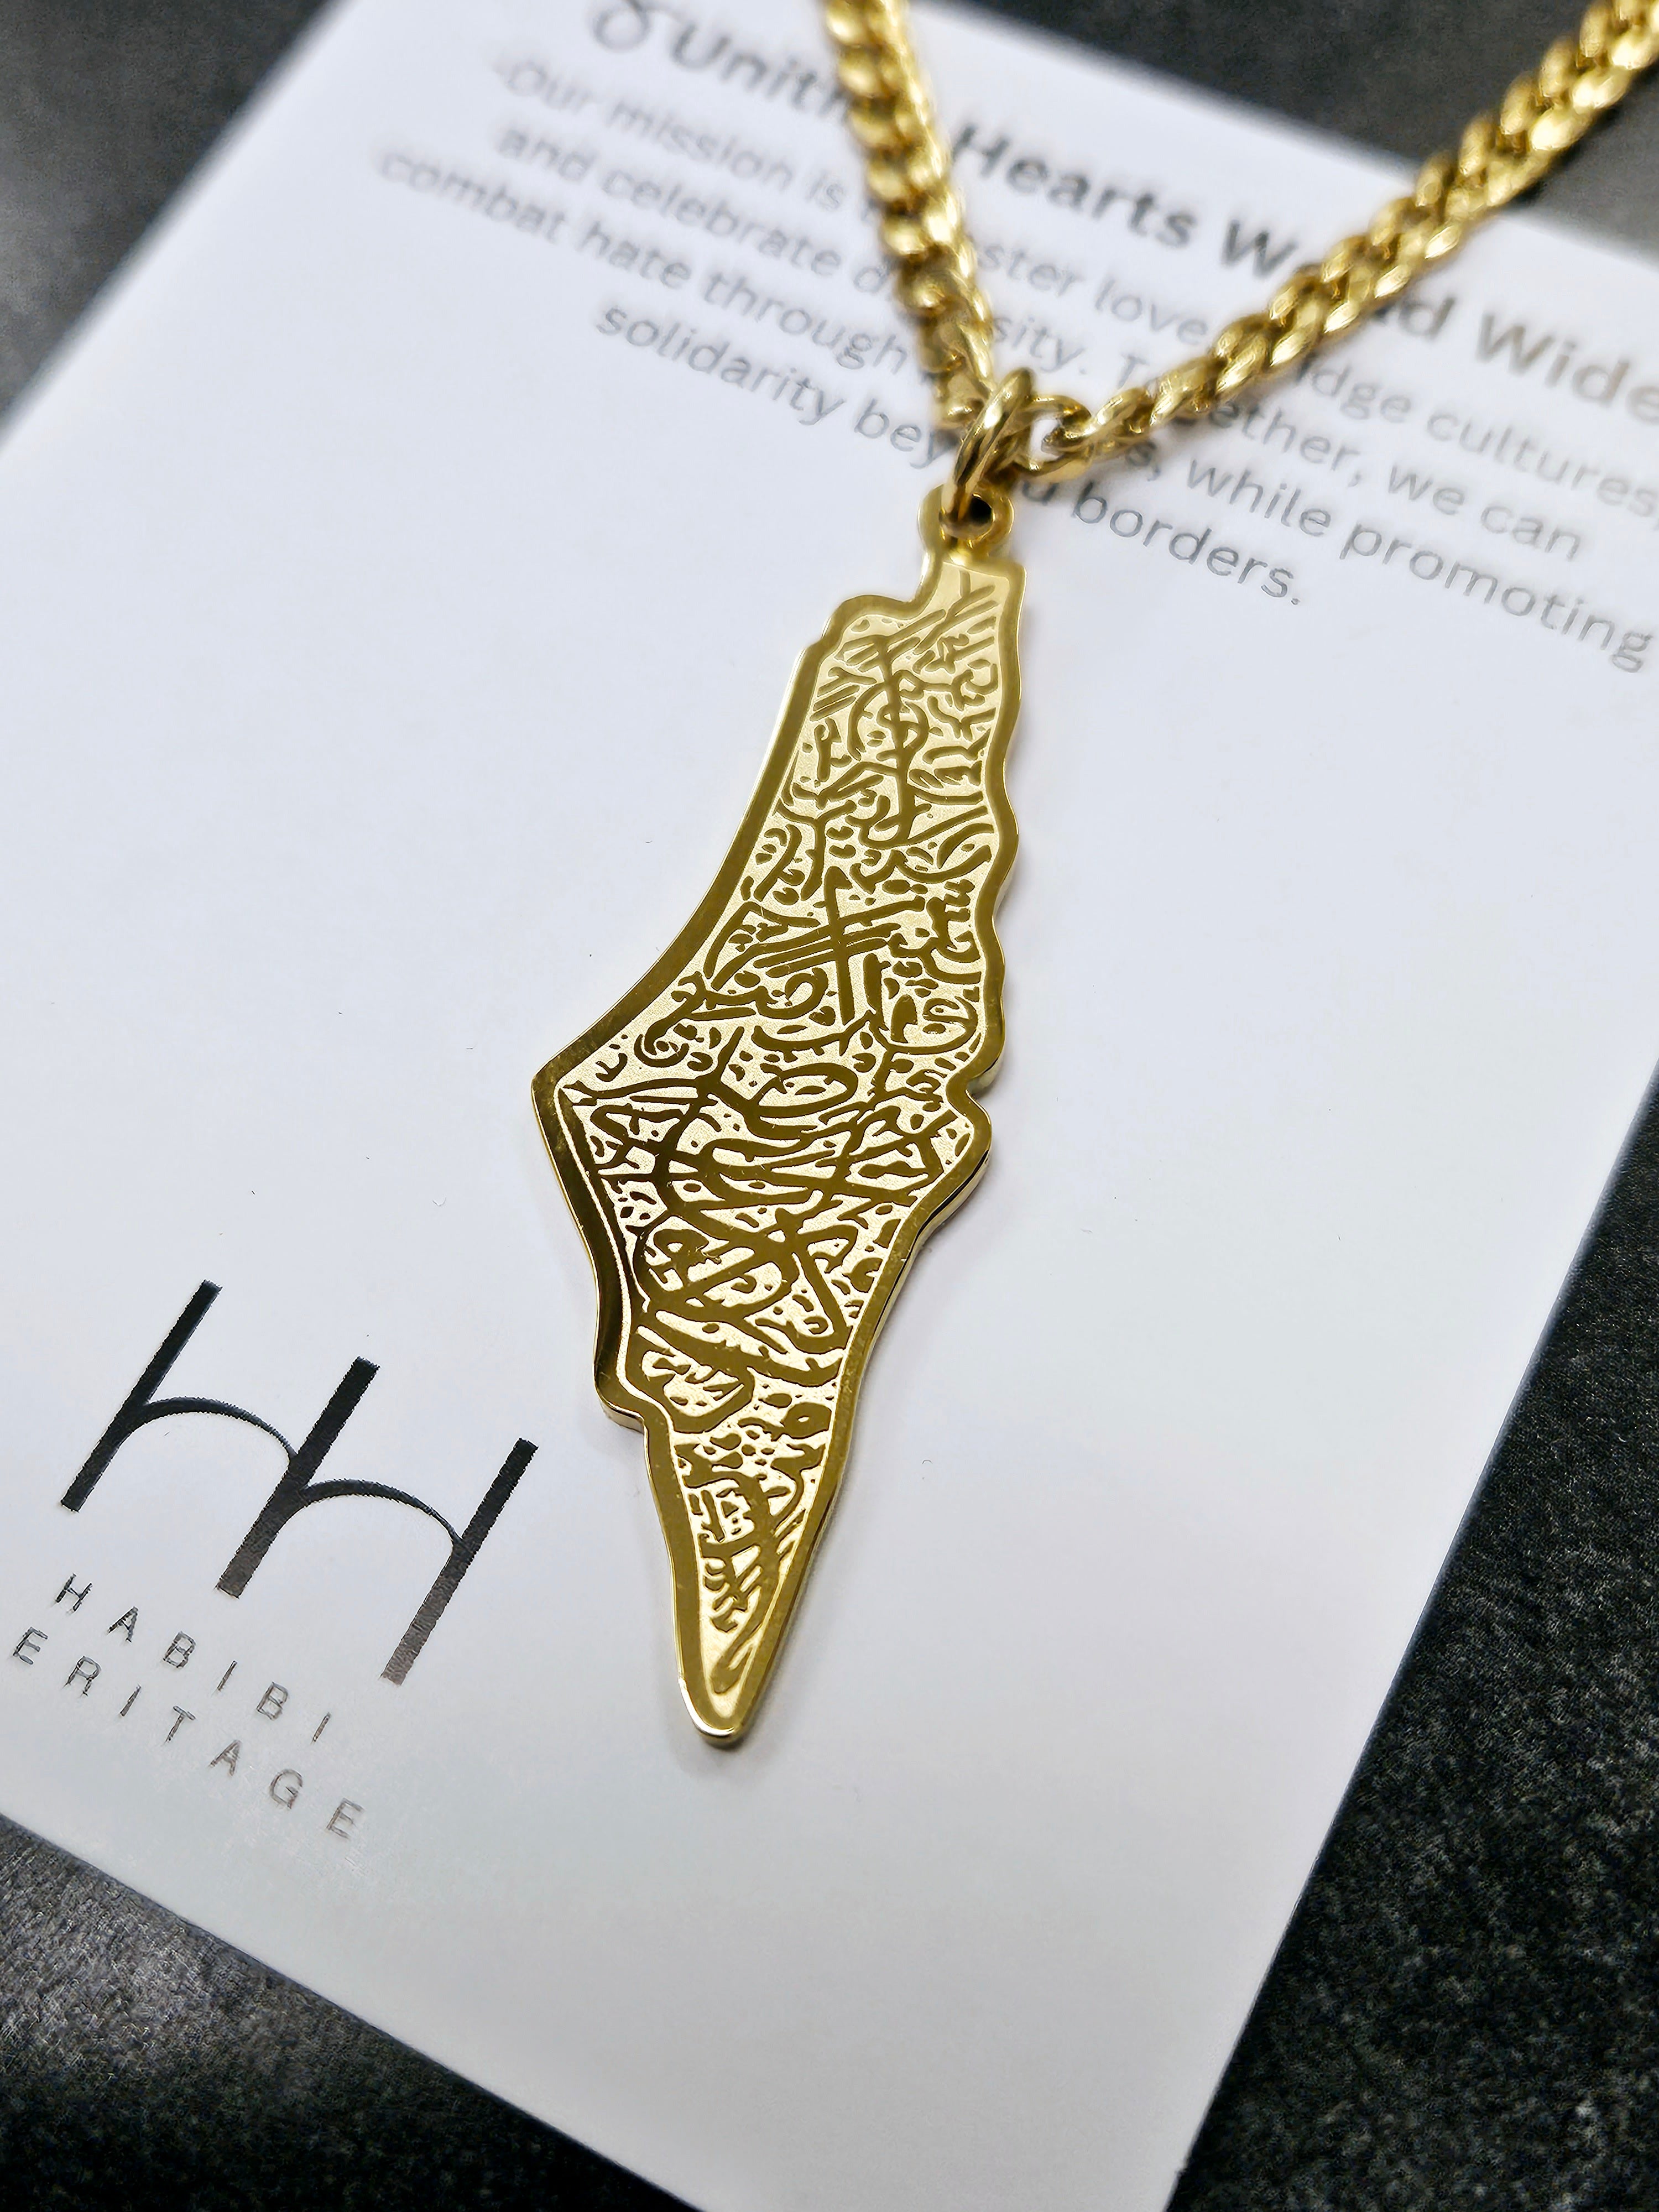 Palestine Map Necklace with Arabic Calligraphy - Habibi Heritage